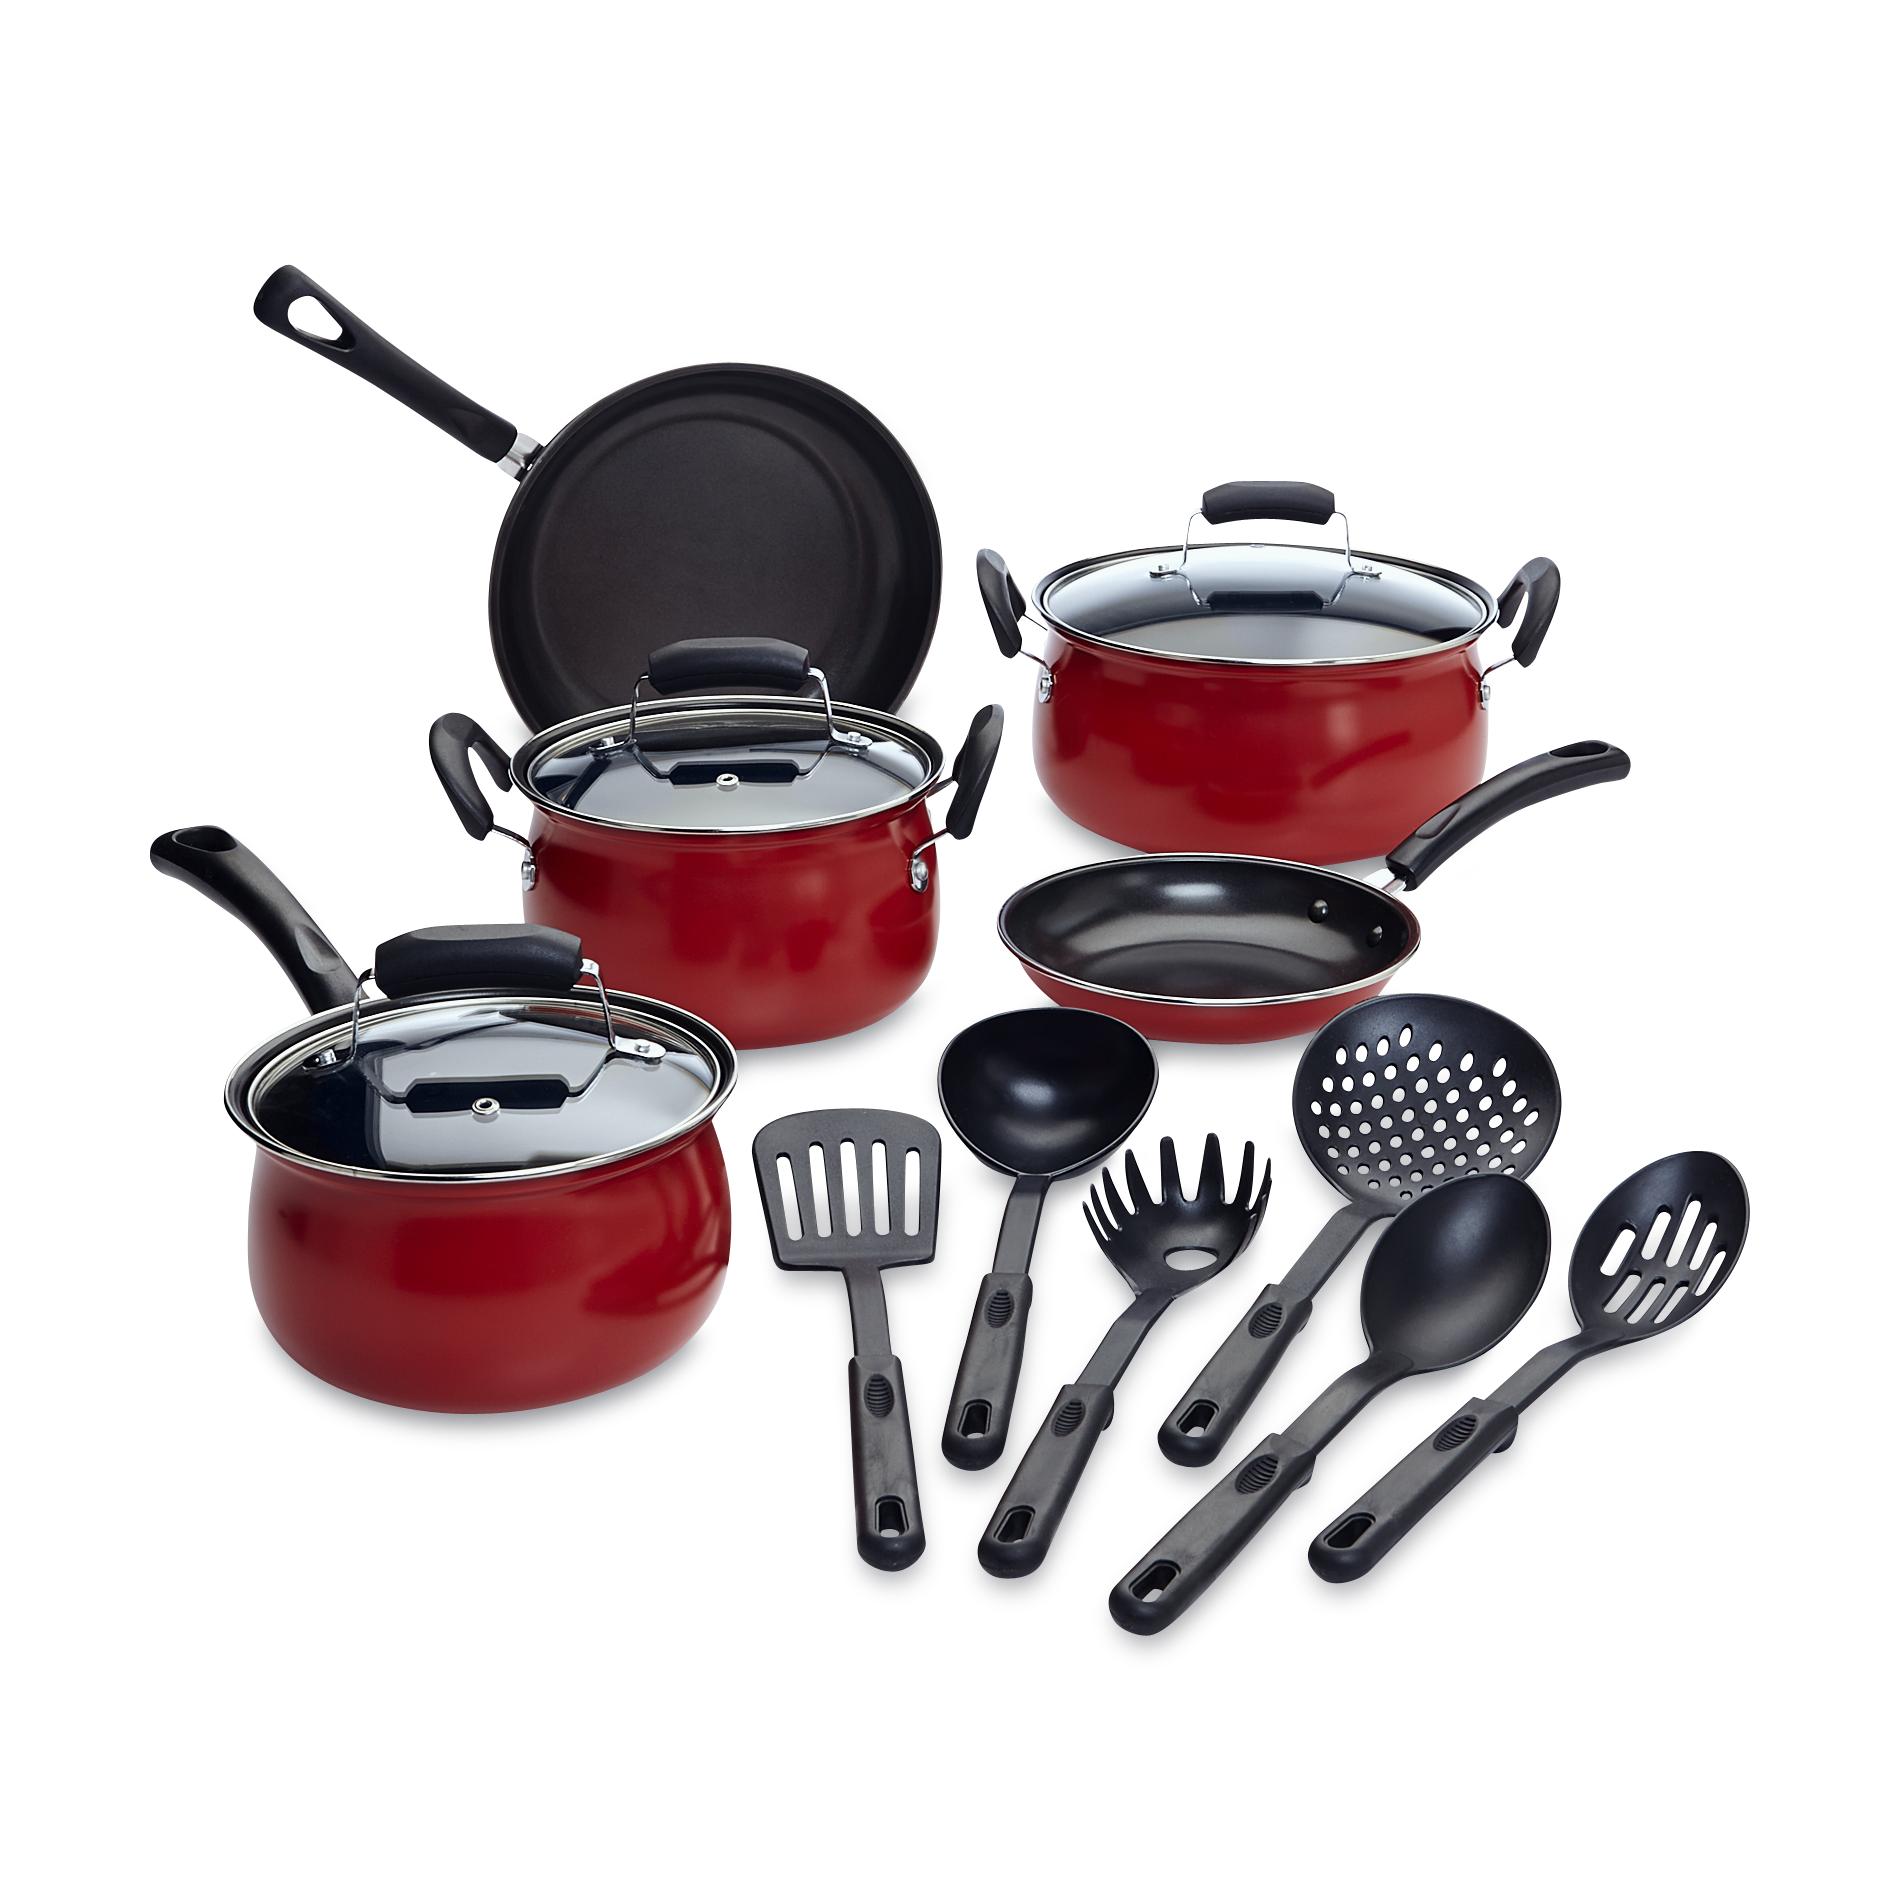 Essential Home 14 Piece Cookware Sets as Low as $25.49 + $5 Back in Points!